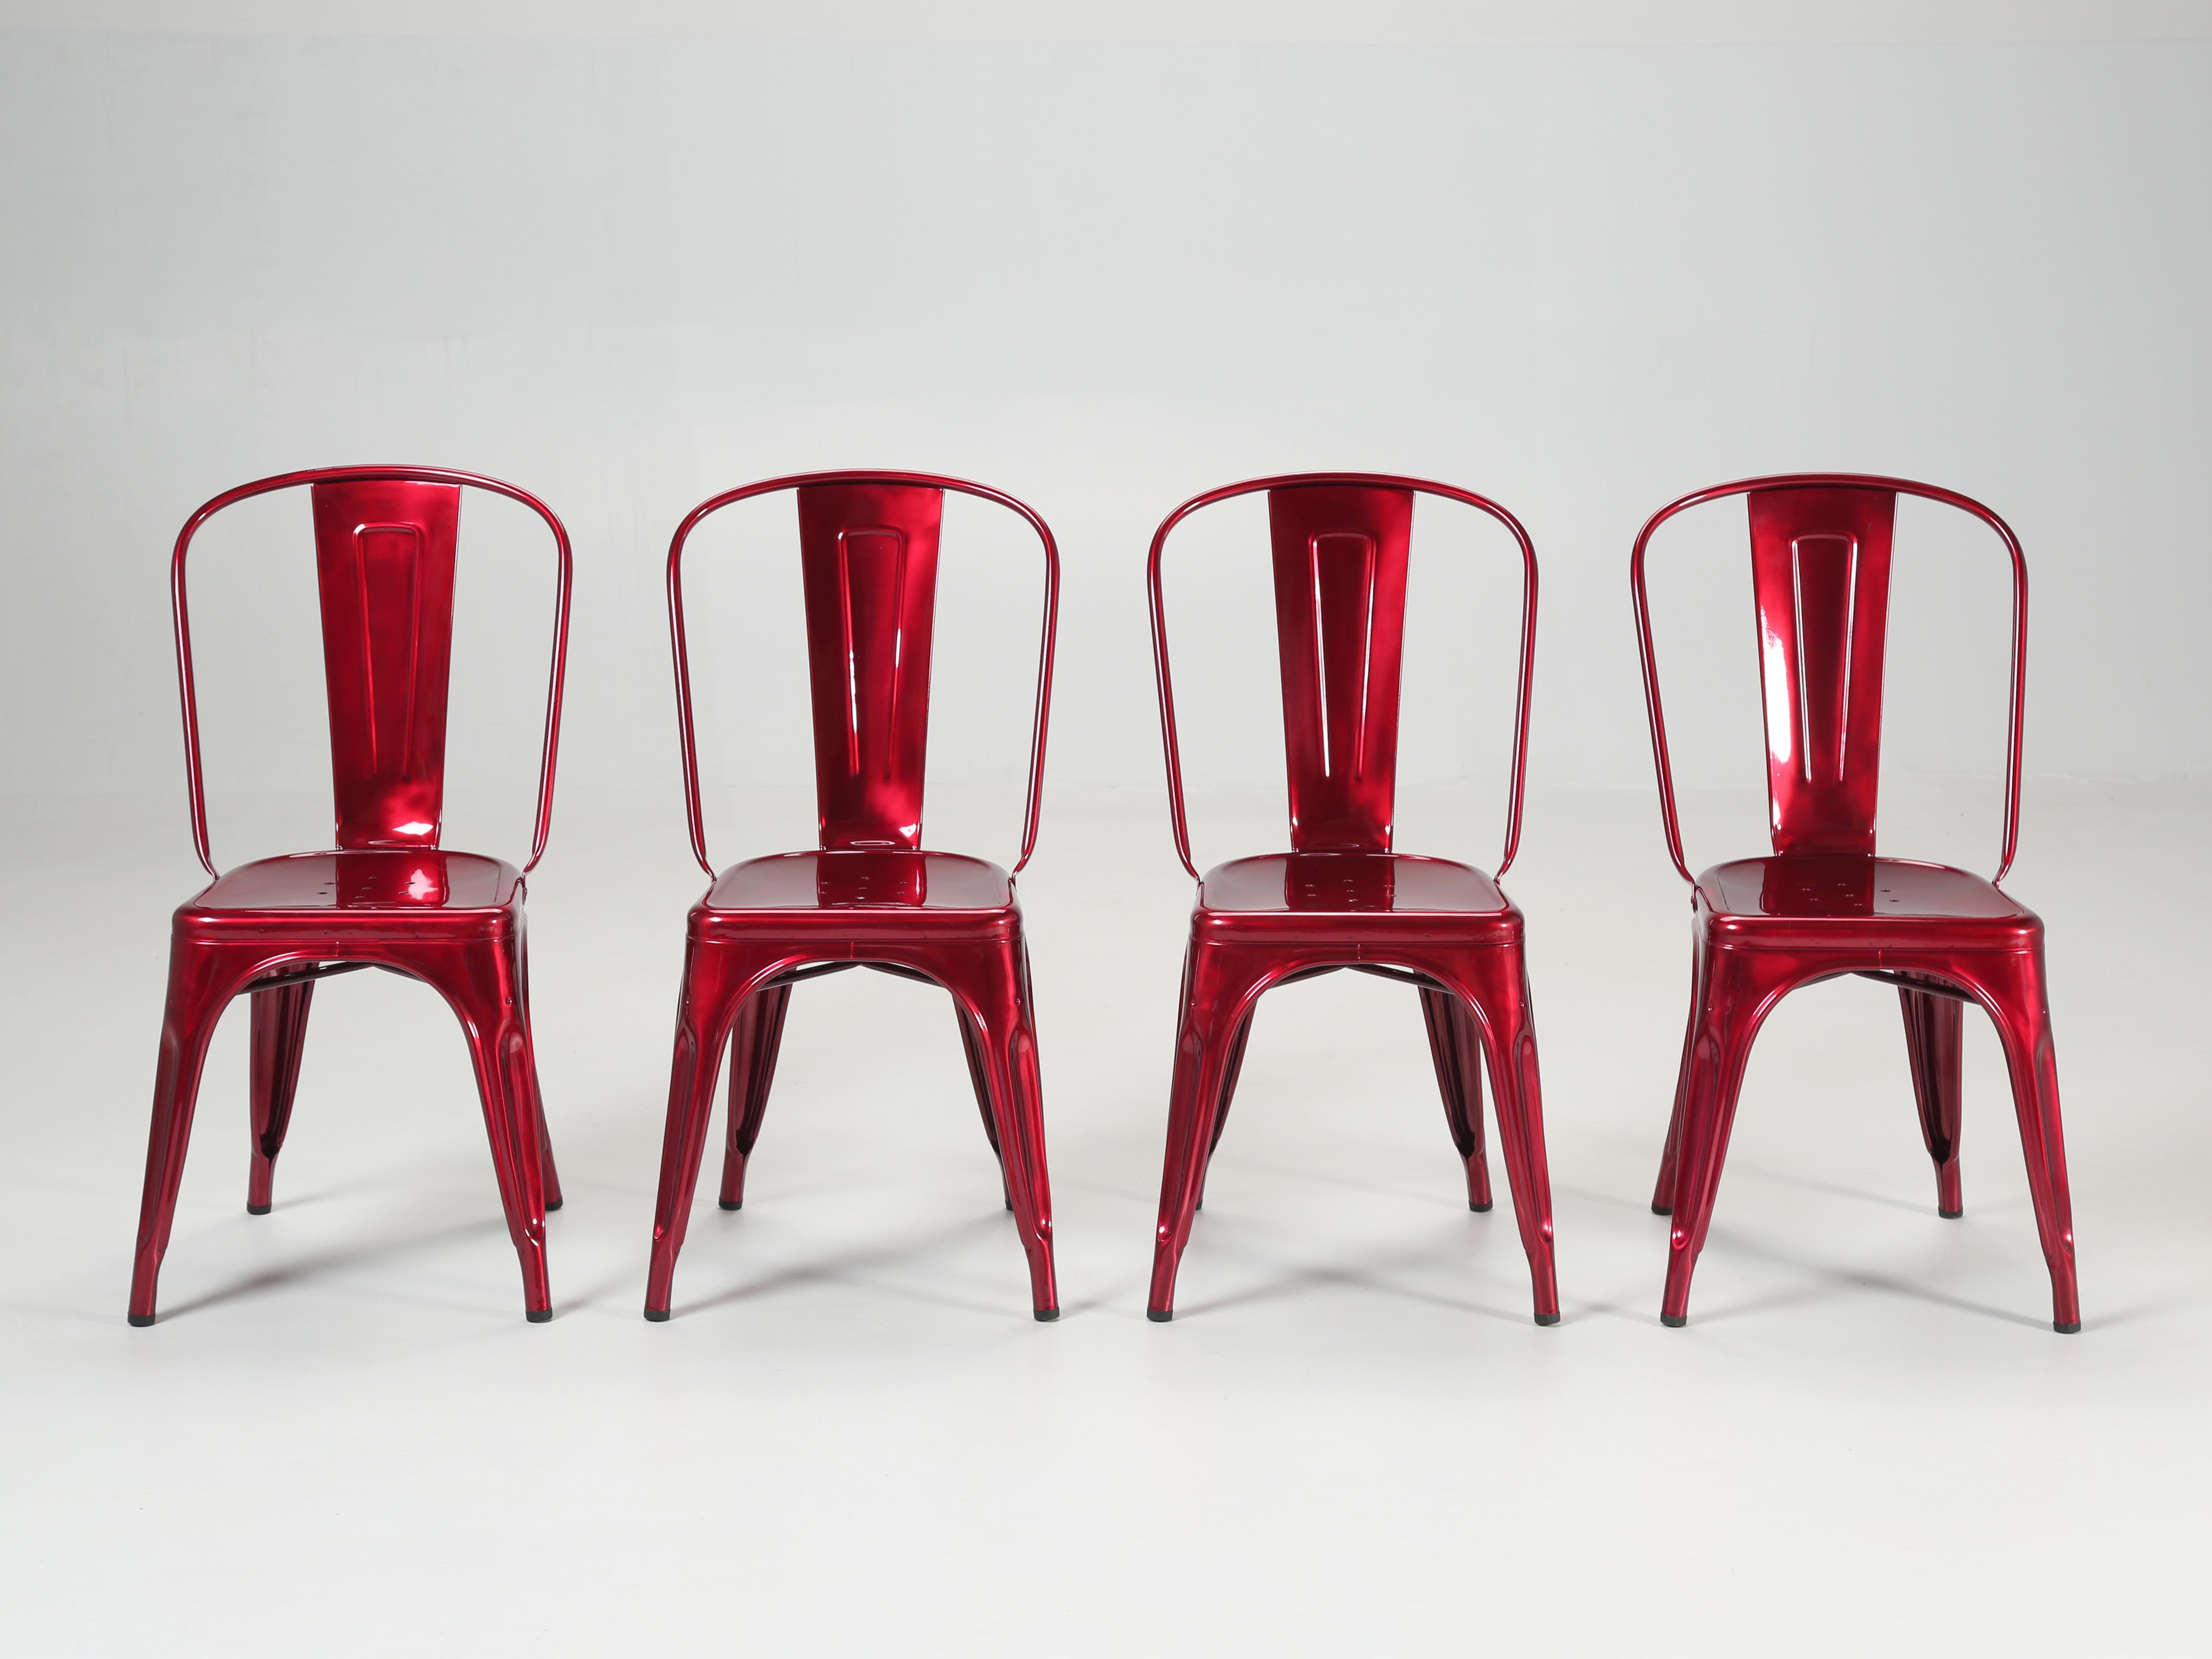 Tolix steel stacking chairs in an incredible vibrant raspberry metallic. In the automotive world, one would call this 